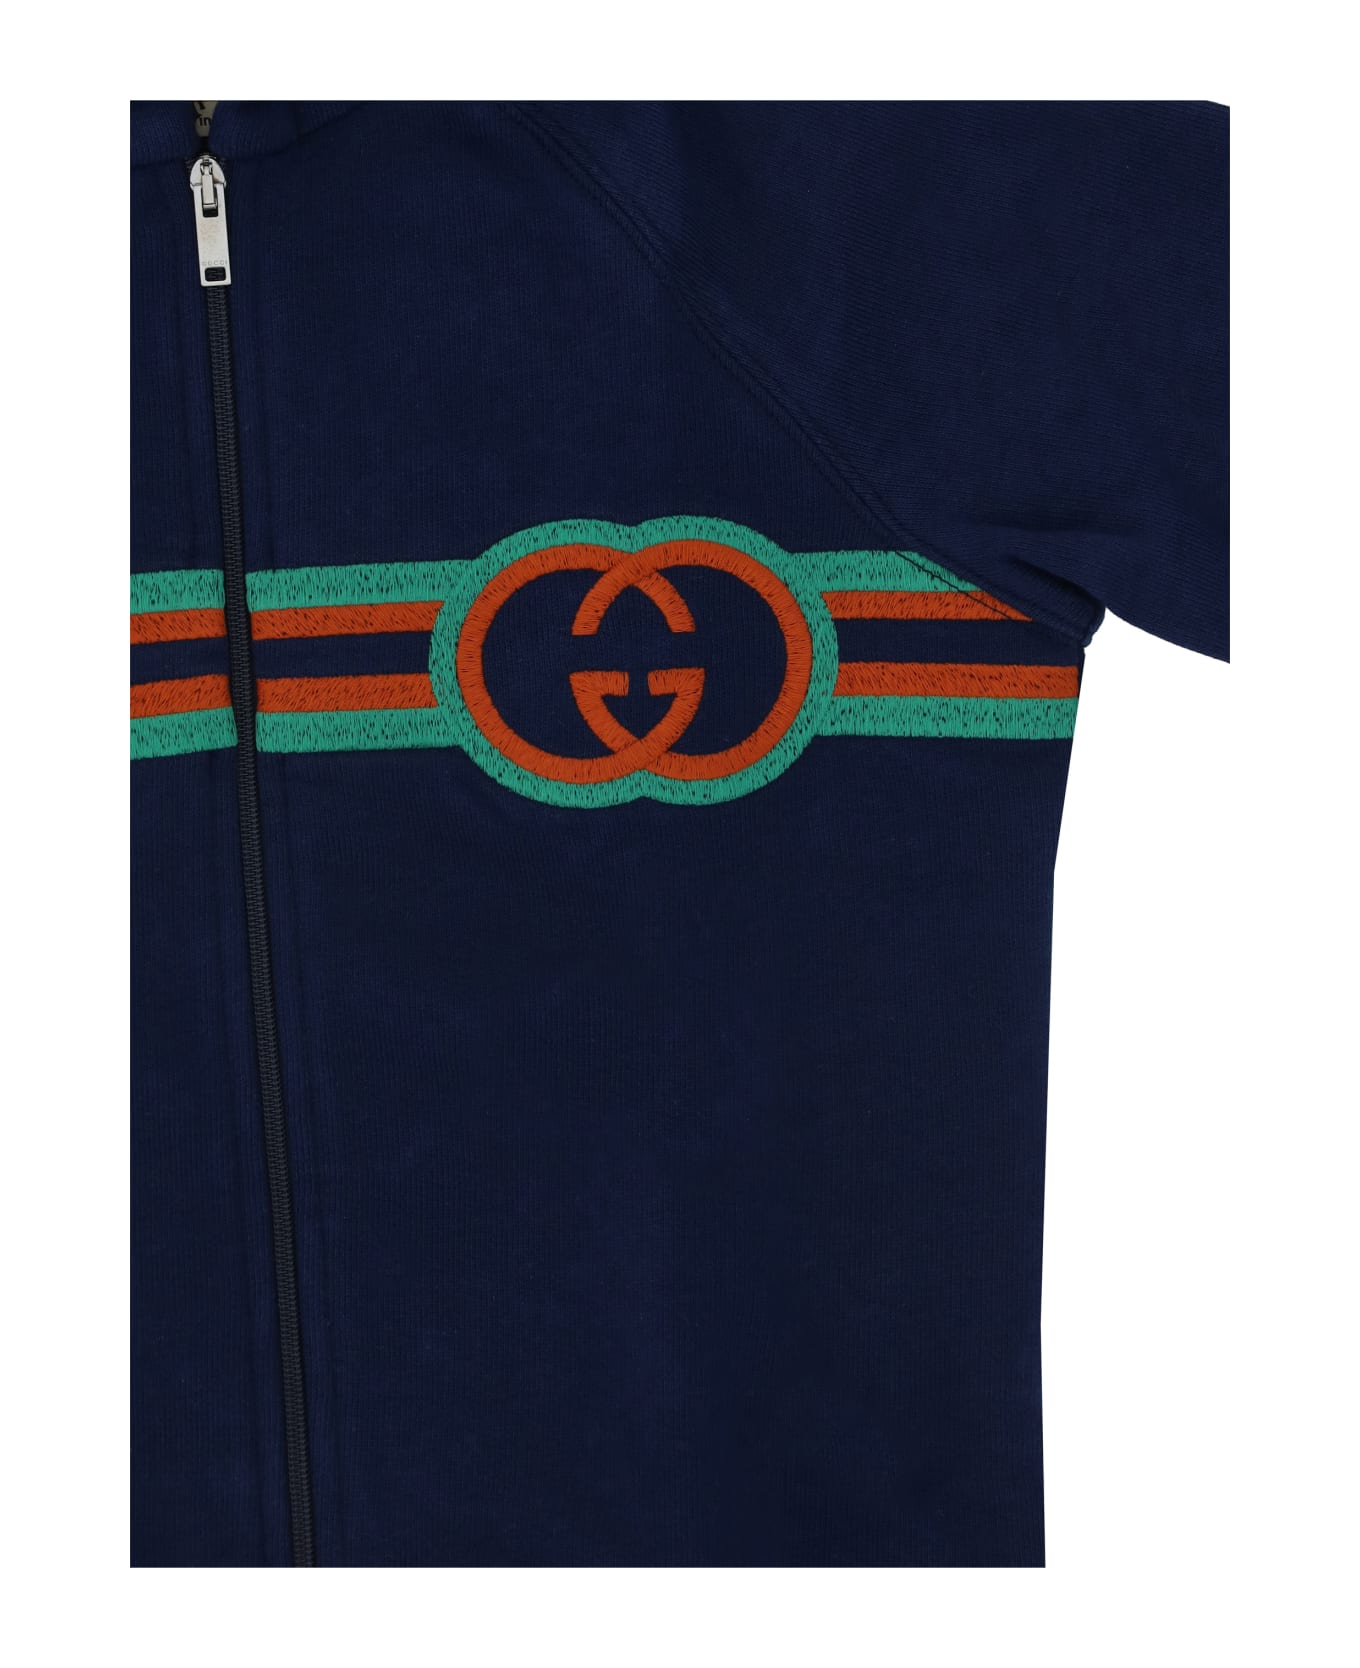 Gucci Hoodie For Boy - Prussian Blue